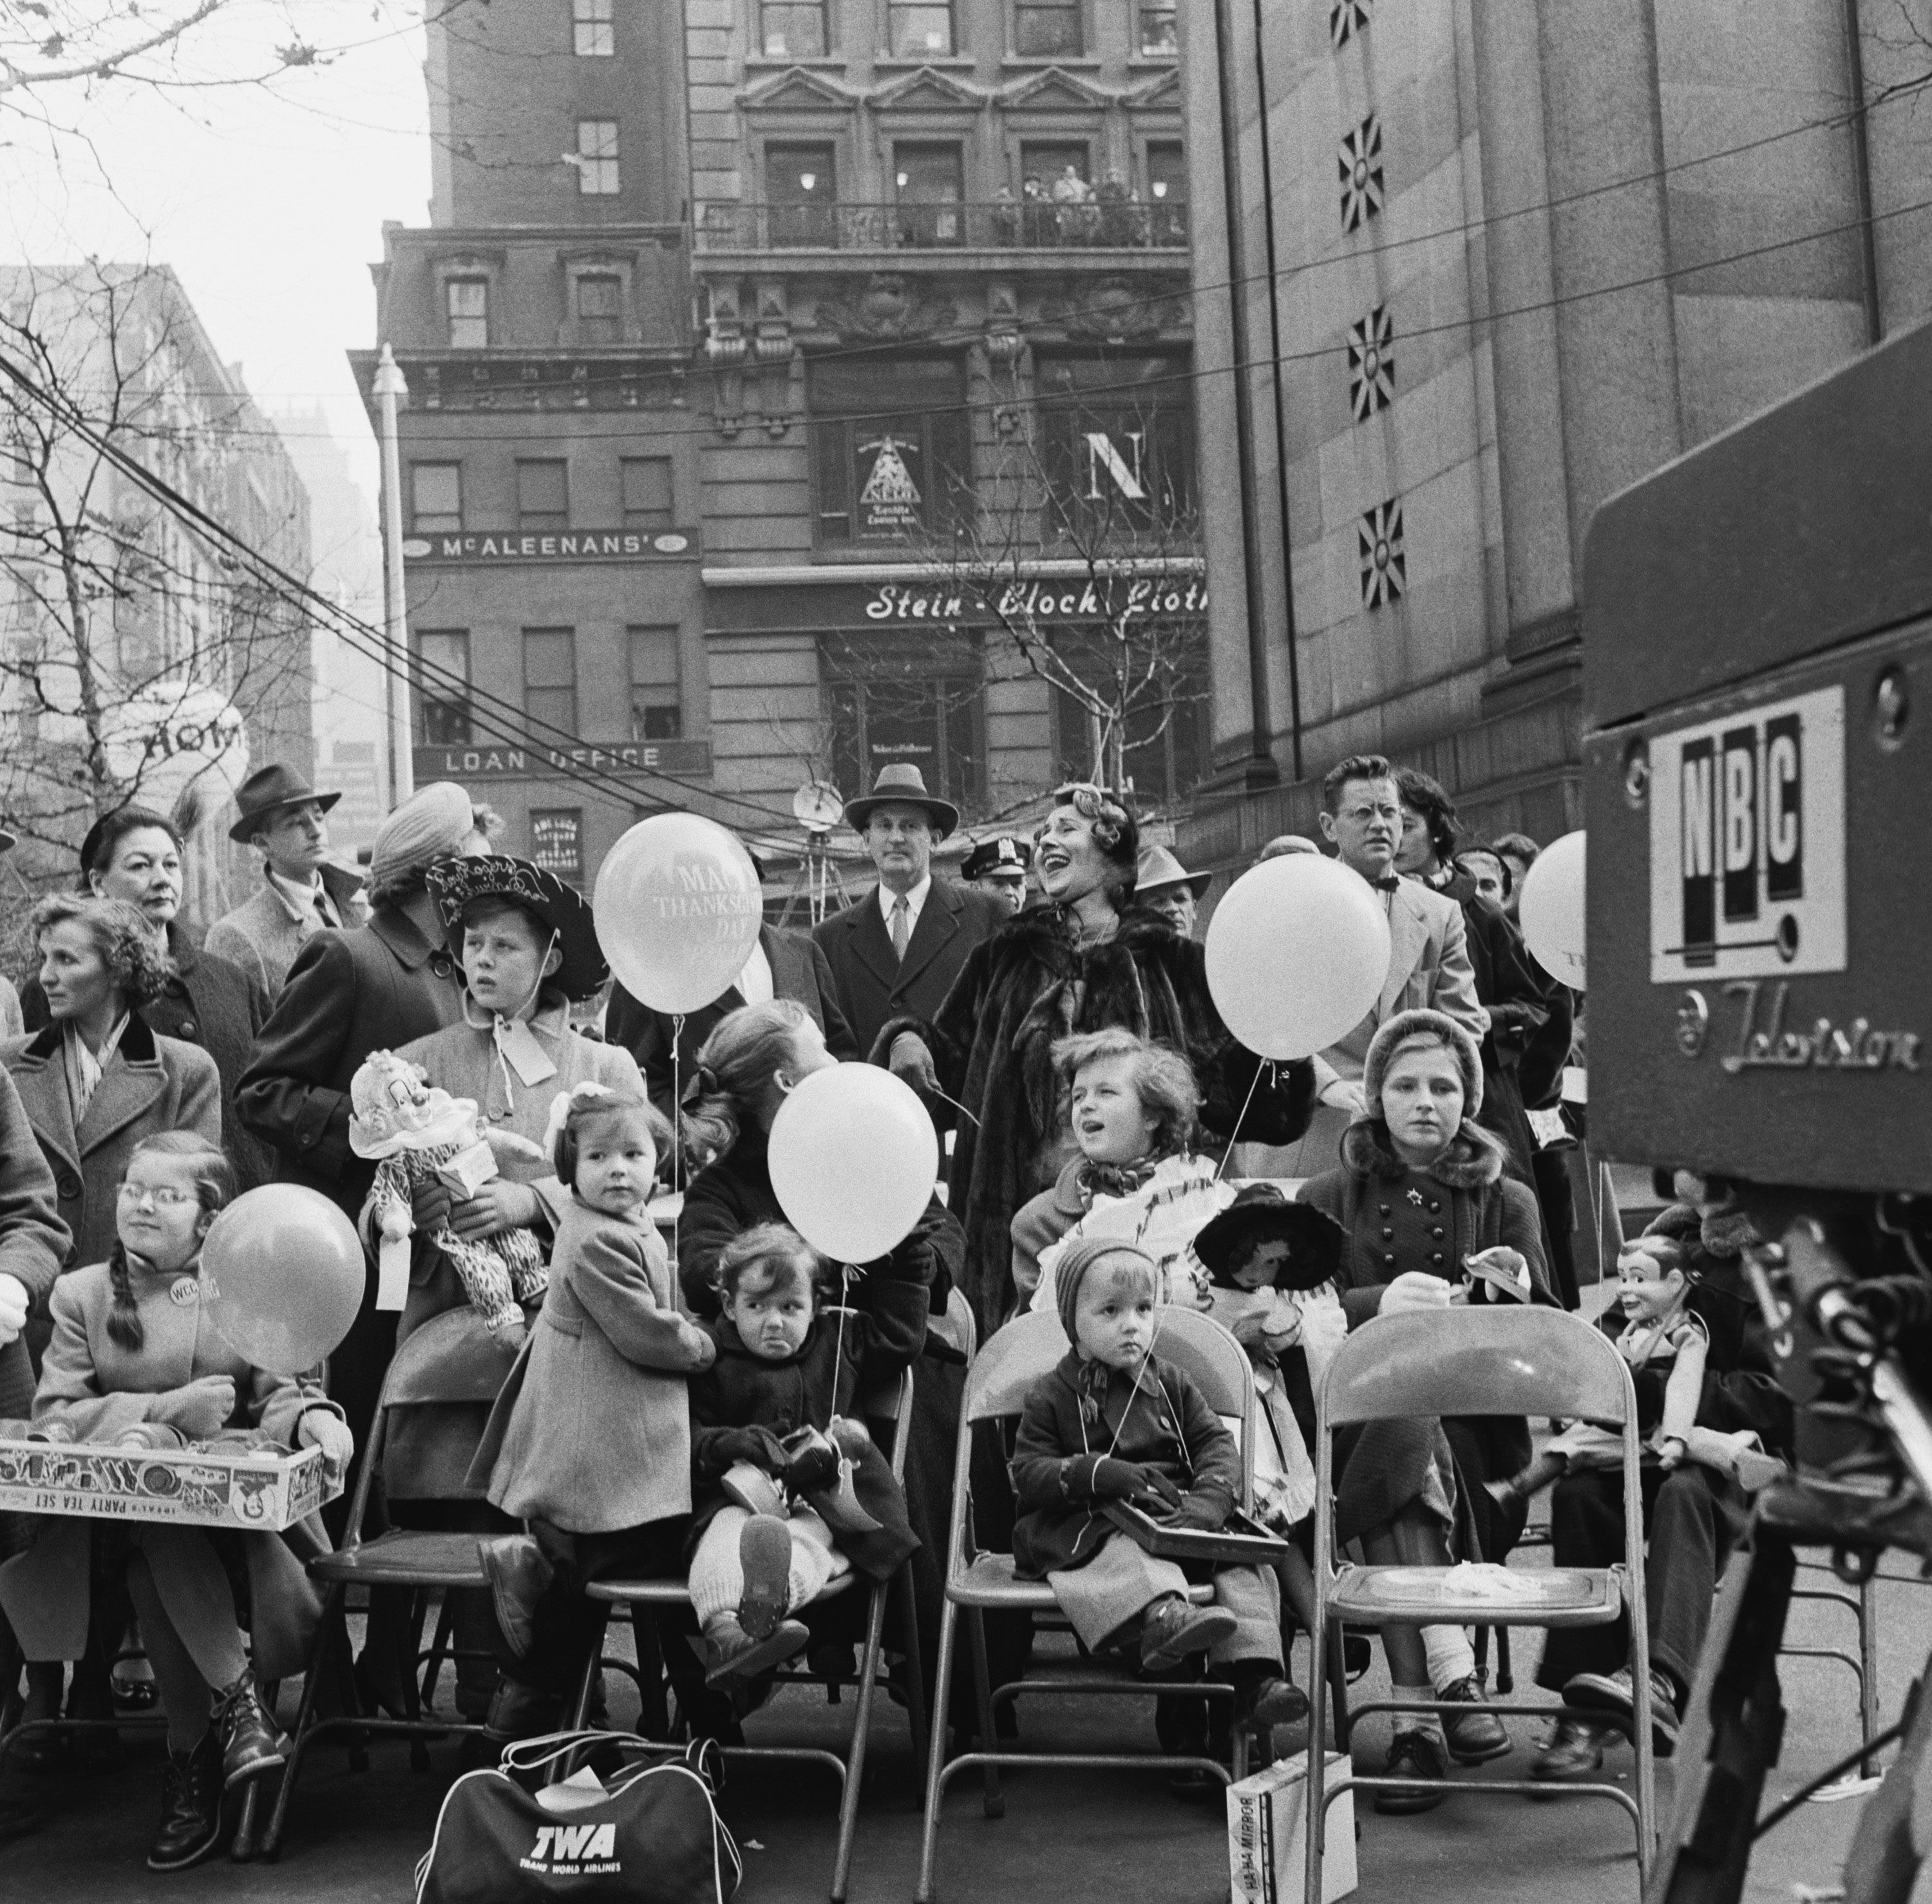 Macy's Thanksgiving Day Parade History & Photos - Facts About the